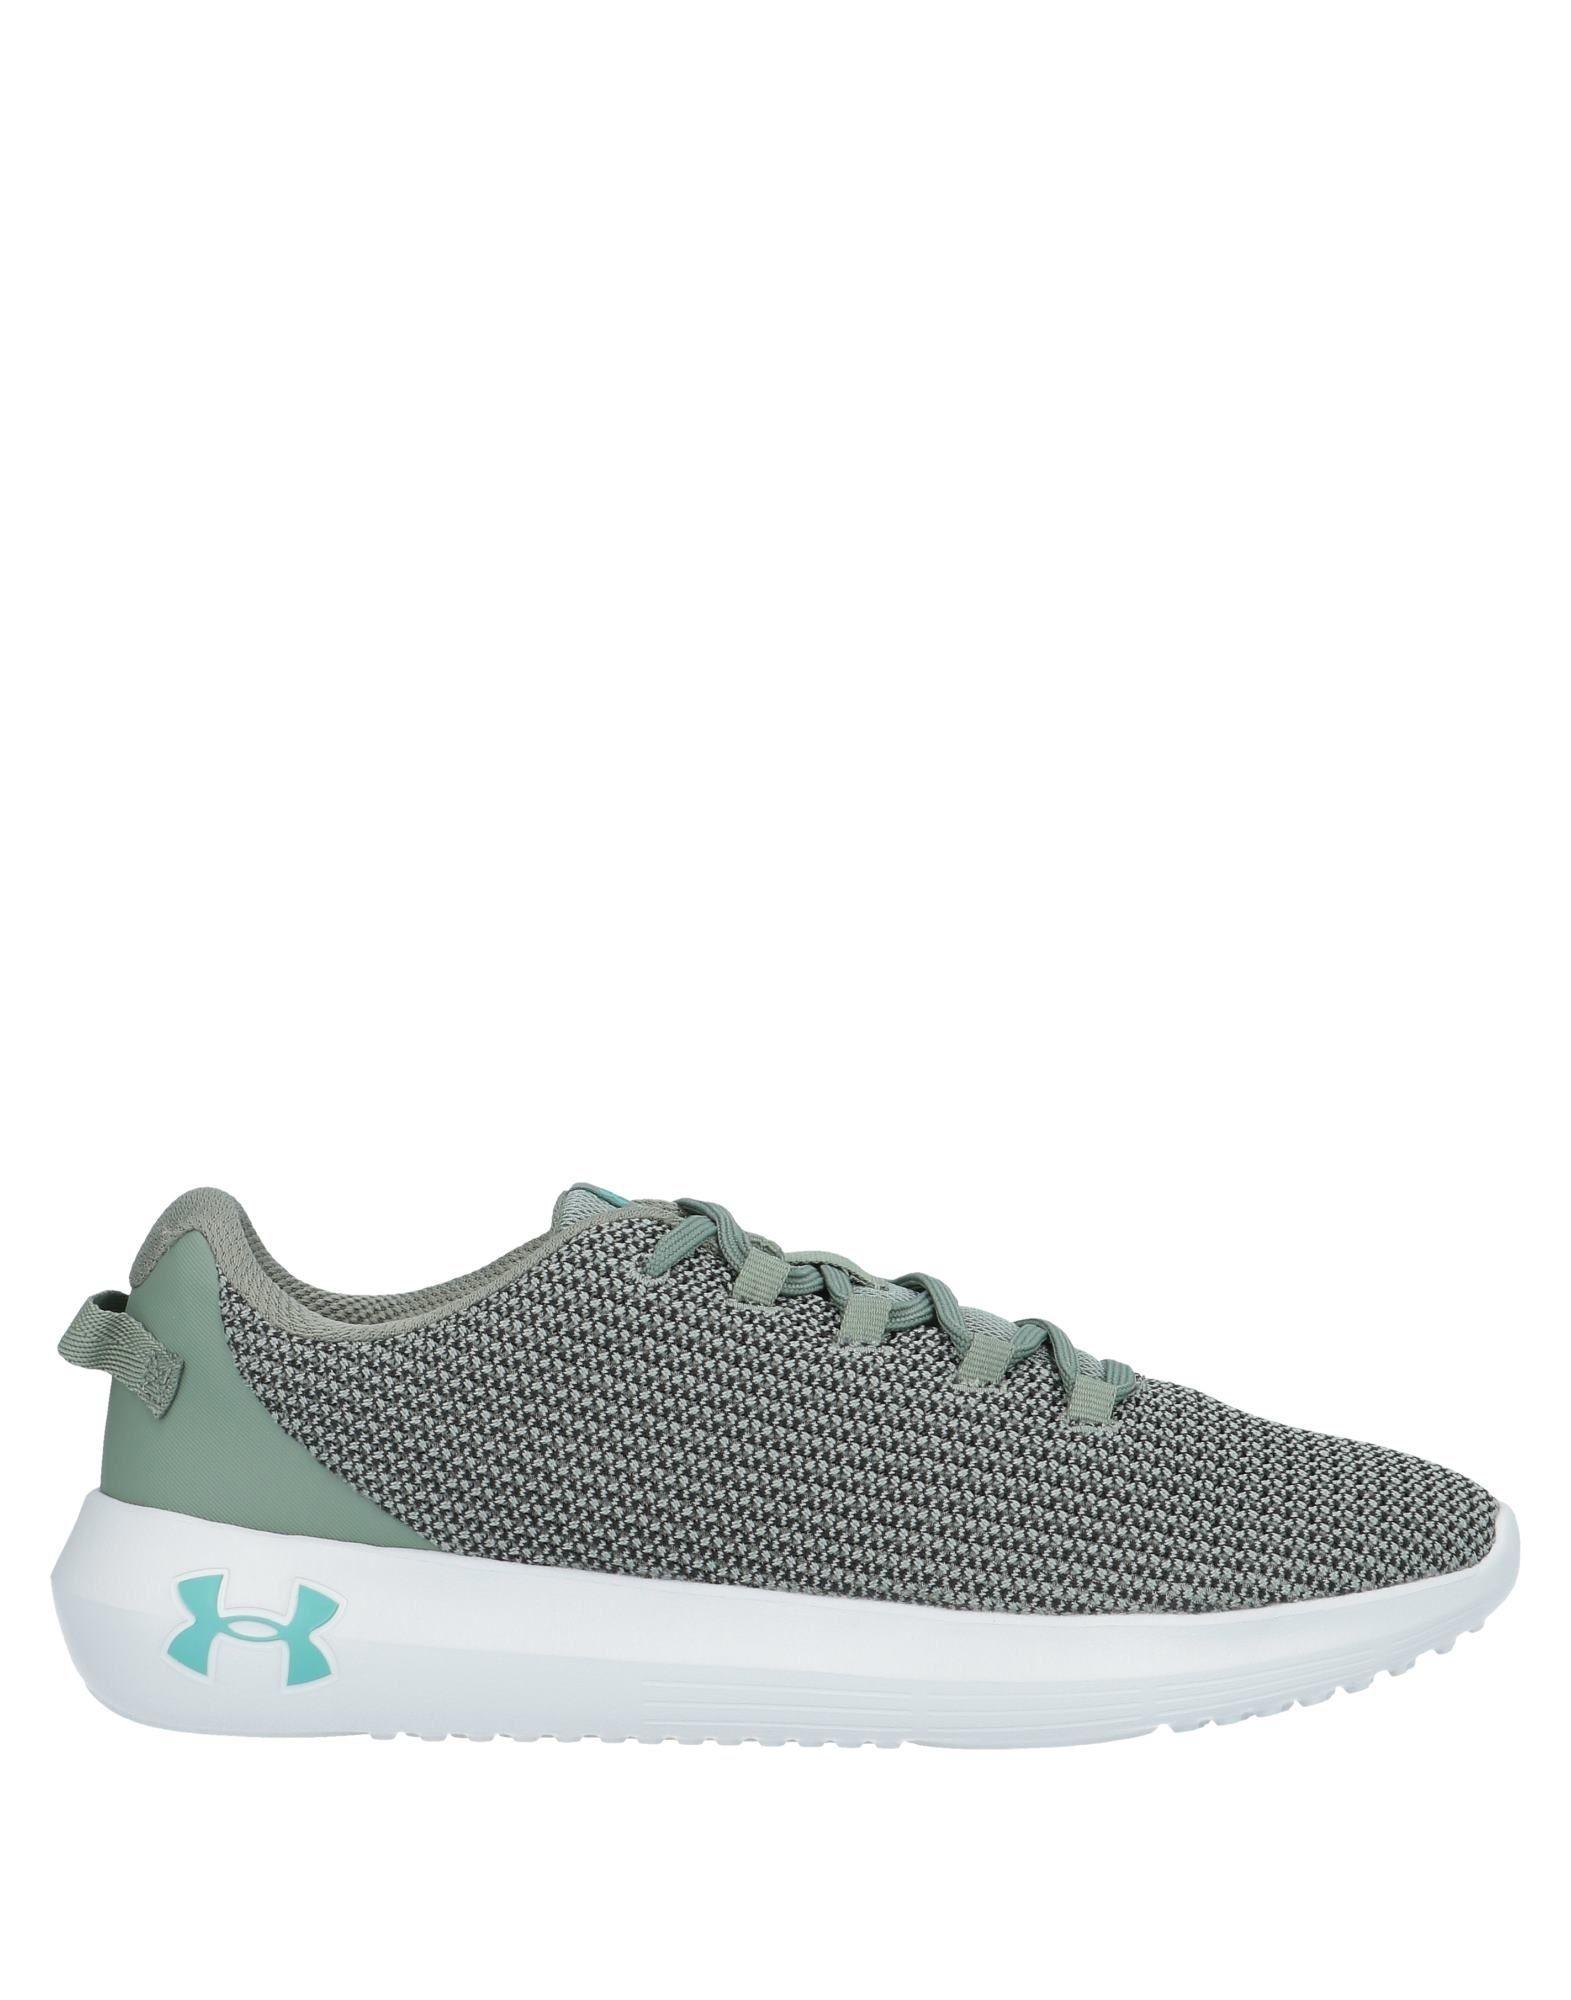 Under Armour Low-tops & Sneakers in Military Green (Green) for Men - Lyst